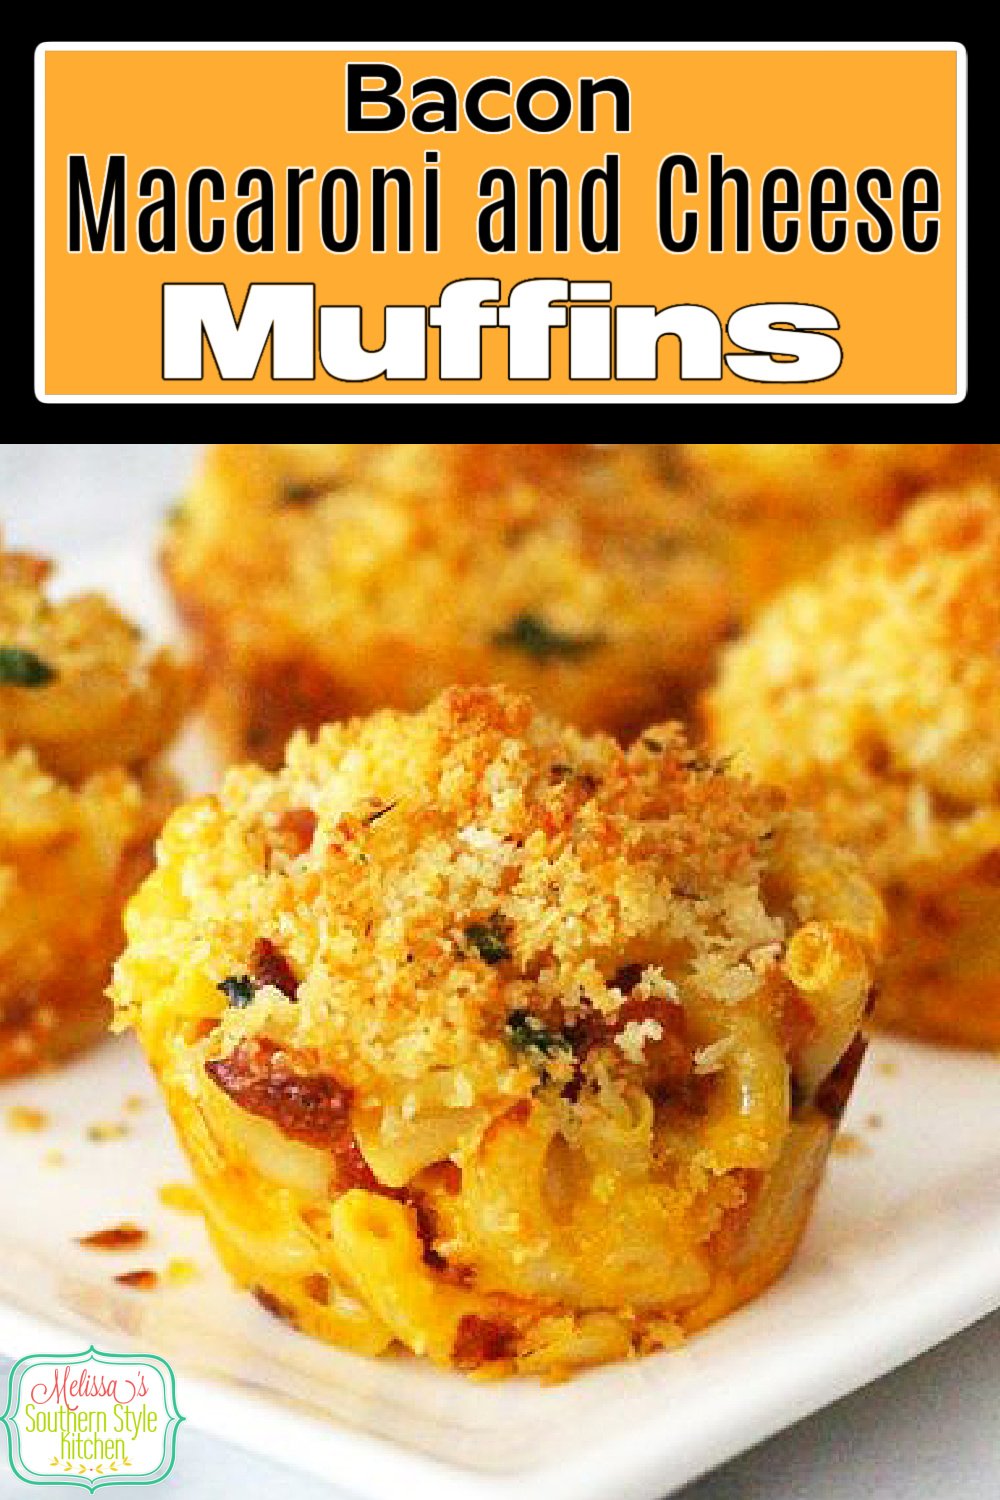 Bacon Macaroni and Cheese Muffins recipe is sure to become a family favorite #macaroniandcheese #pasta #southernmacandcheese #muffins #baconmacaroniandcheese #macandcheeserecipes #bestmacandcheese #macaroniandcheesemuffins via @melissasssk